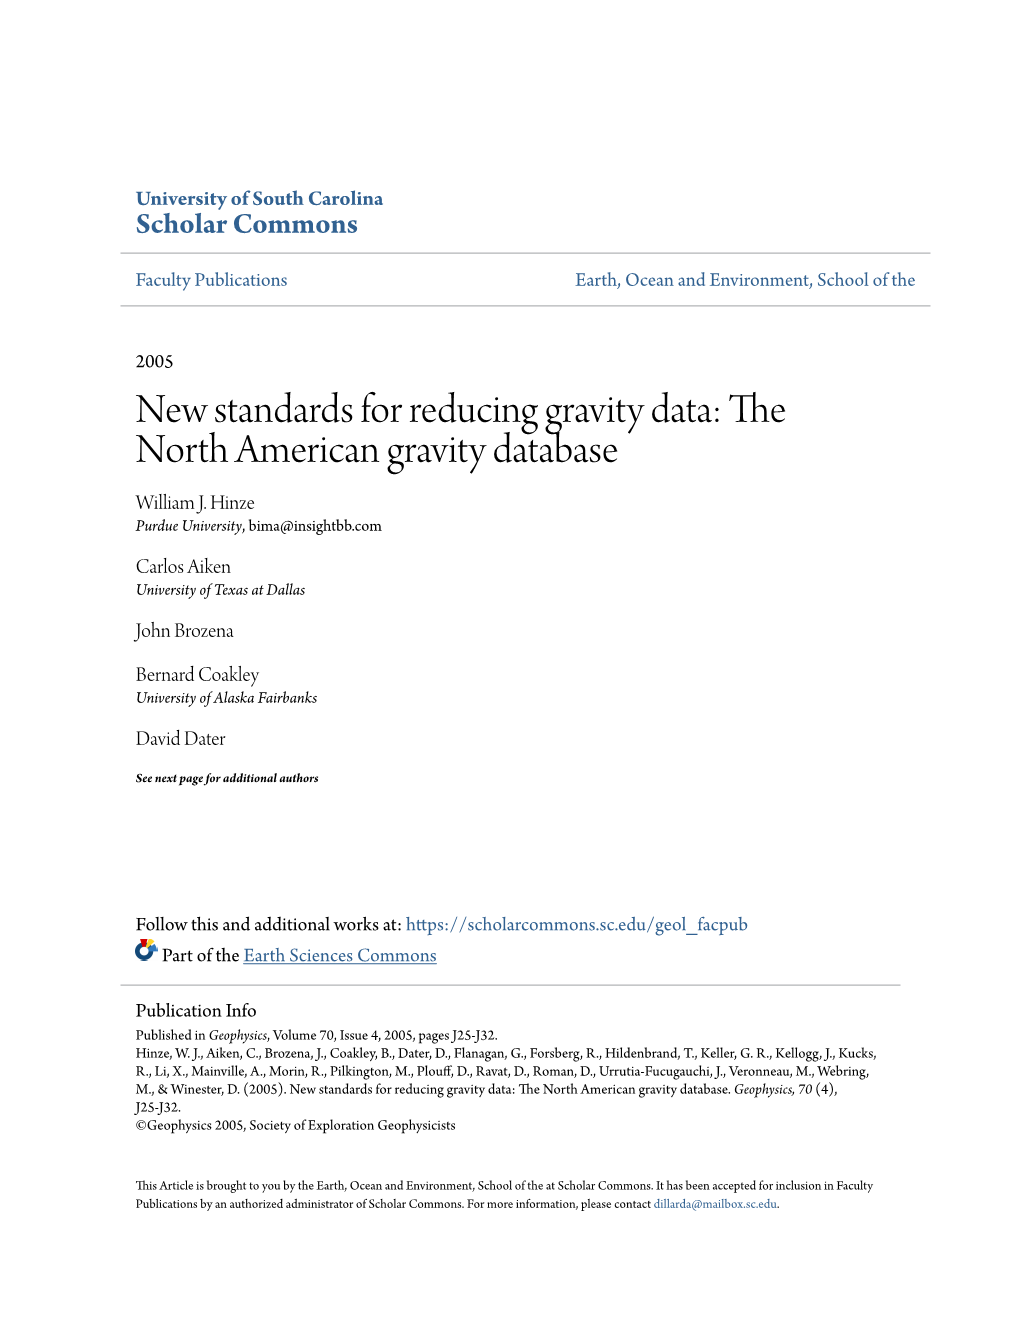 New Standards for Reducing Gravity Data: the North American Gravity Database William J